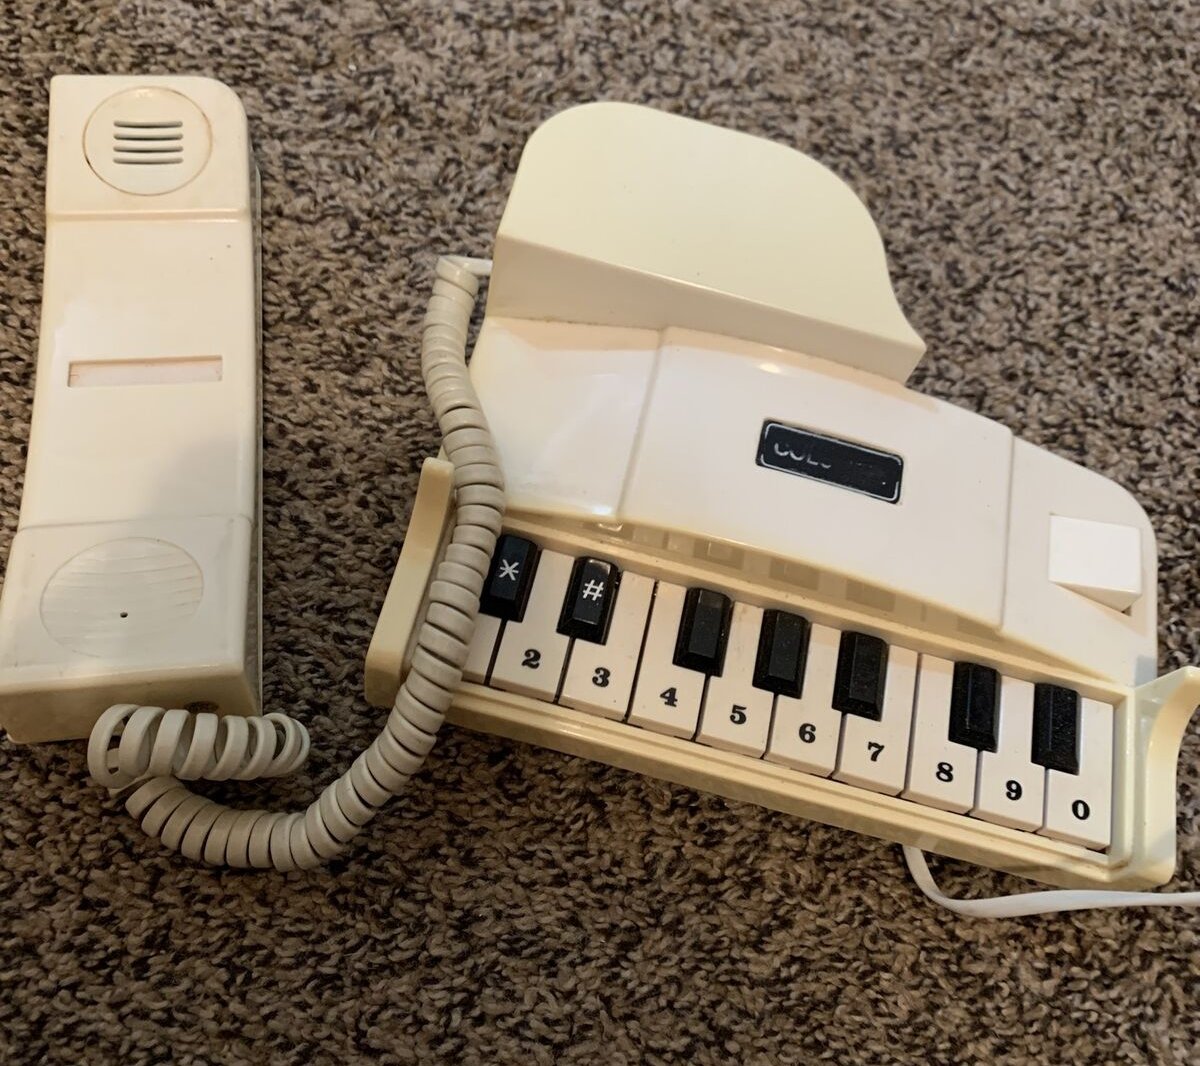 My favorite part of the Piano Phone is the digits being on the keyboard. that's great.